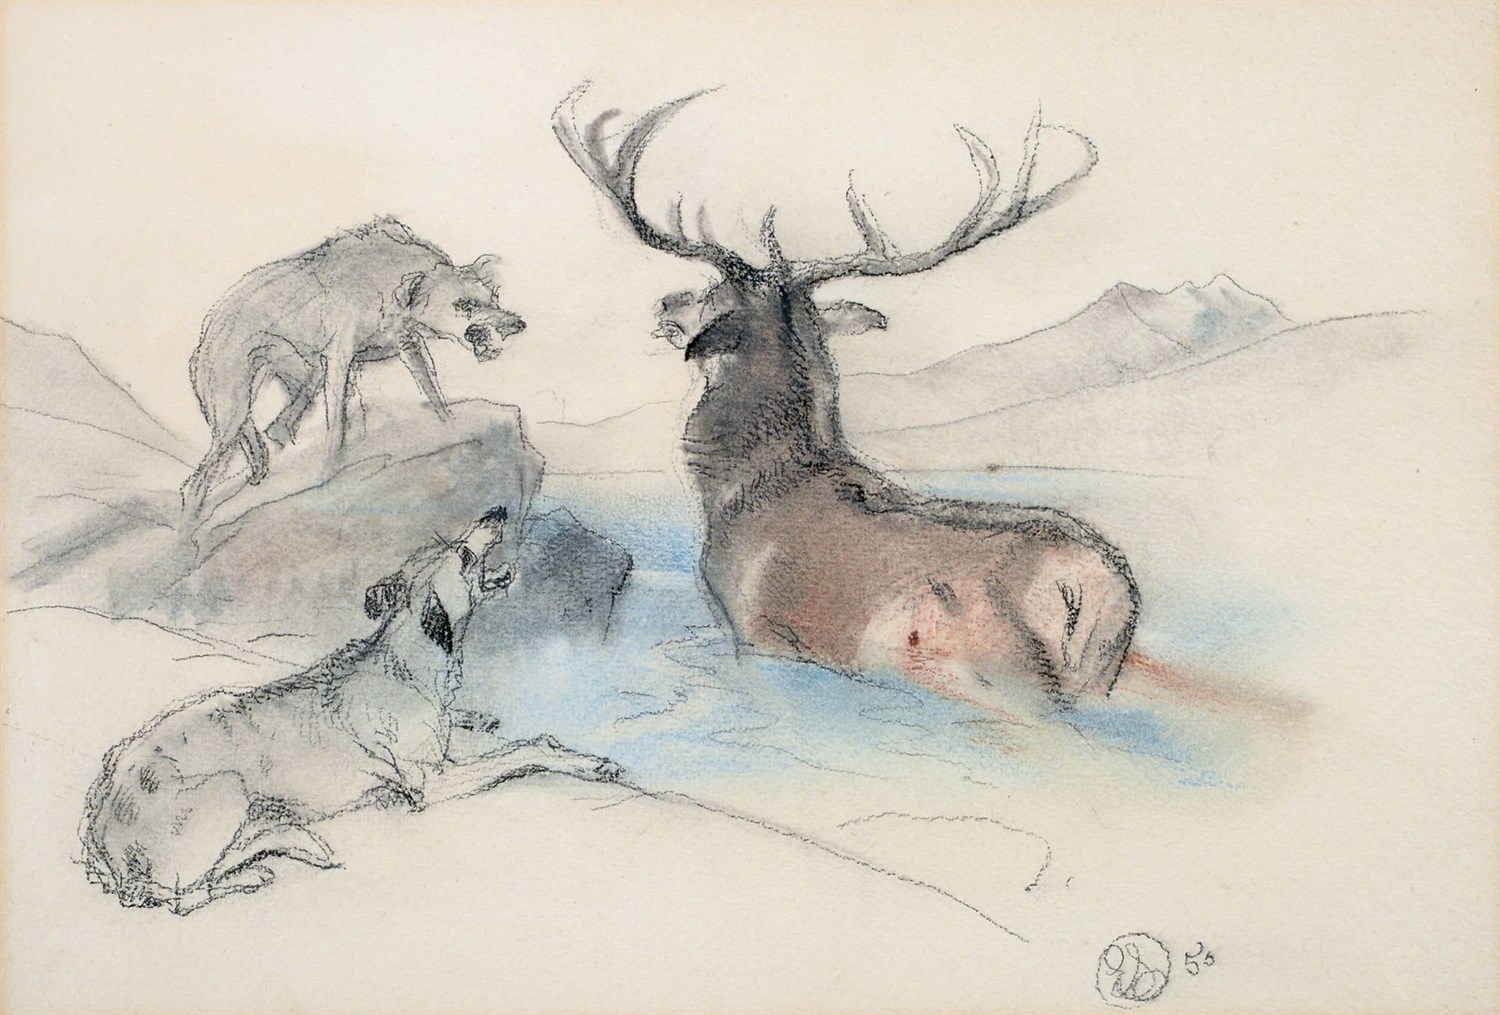 Lot 1021 - Sir Edwin Henry Landseer RA (1802-1873) A stag at bay Monogrammed and dated (18)50, pencil and...